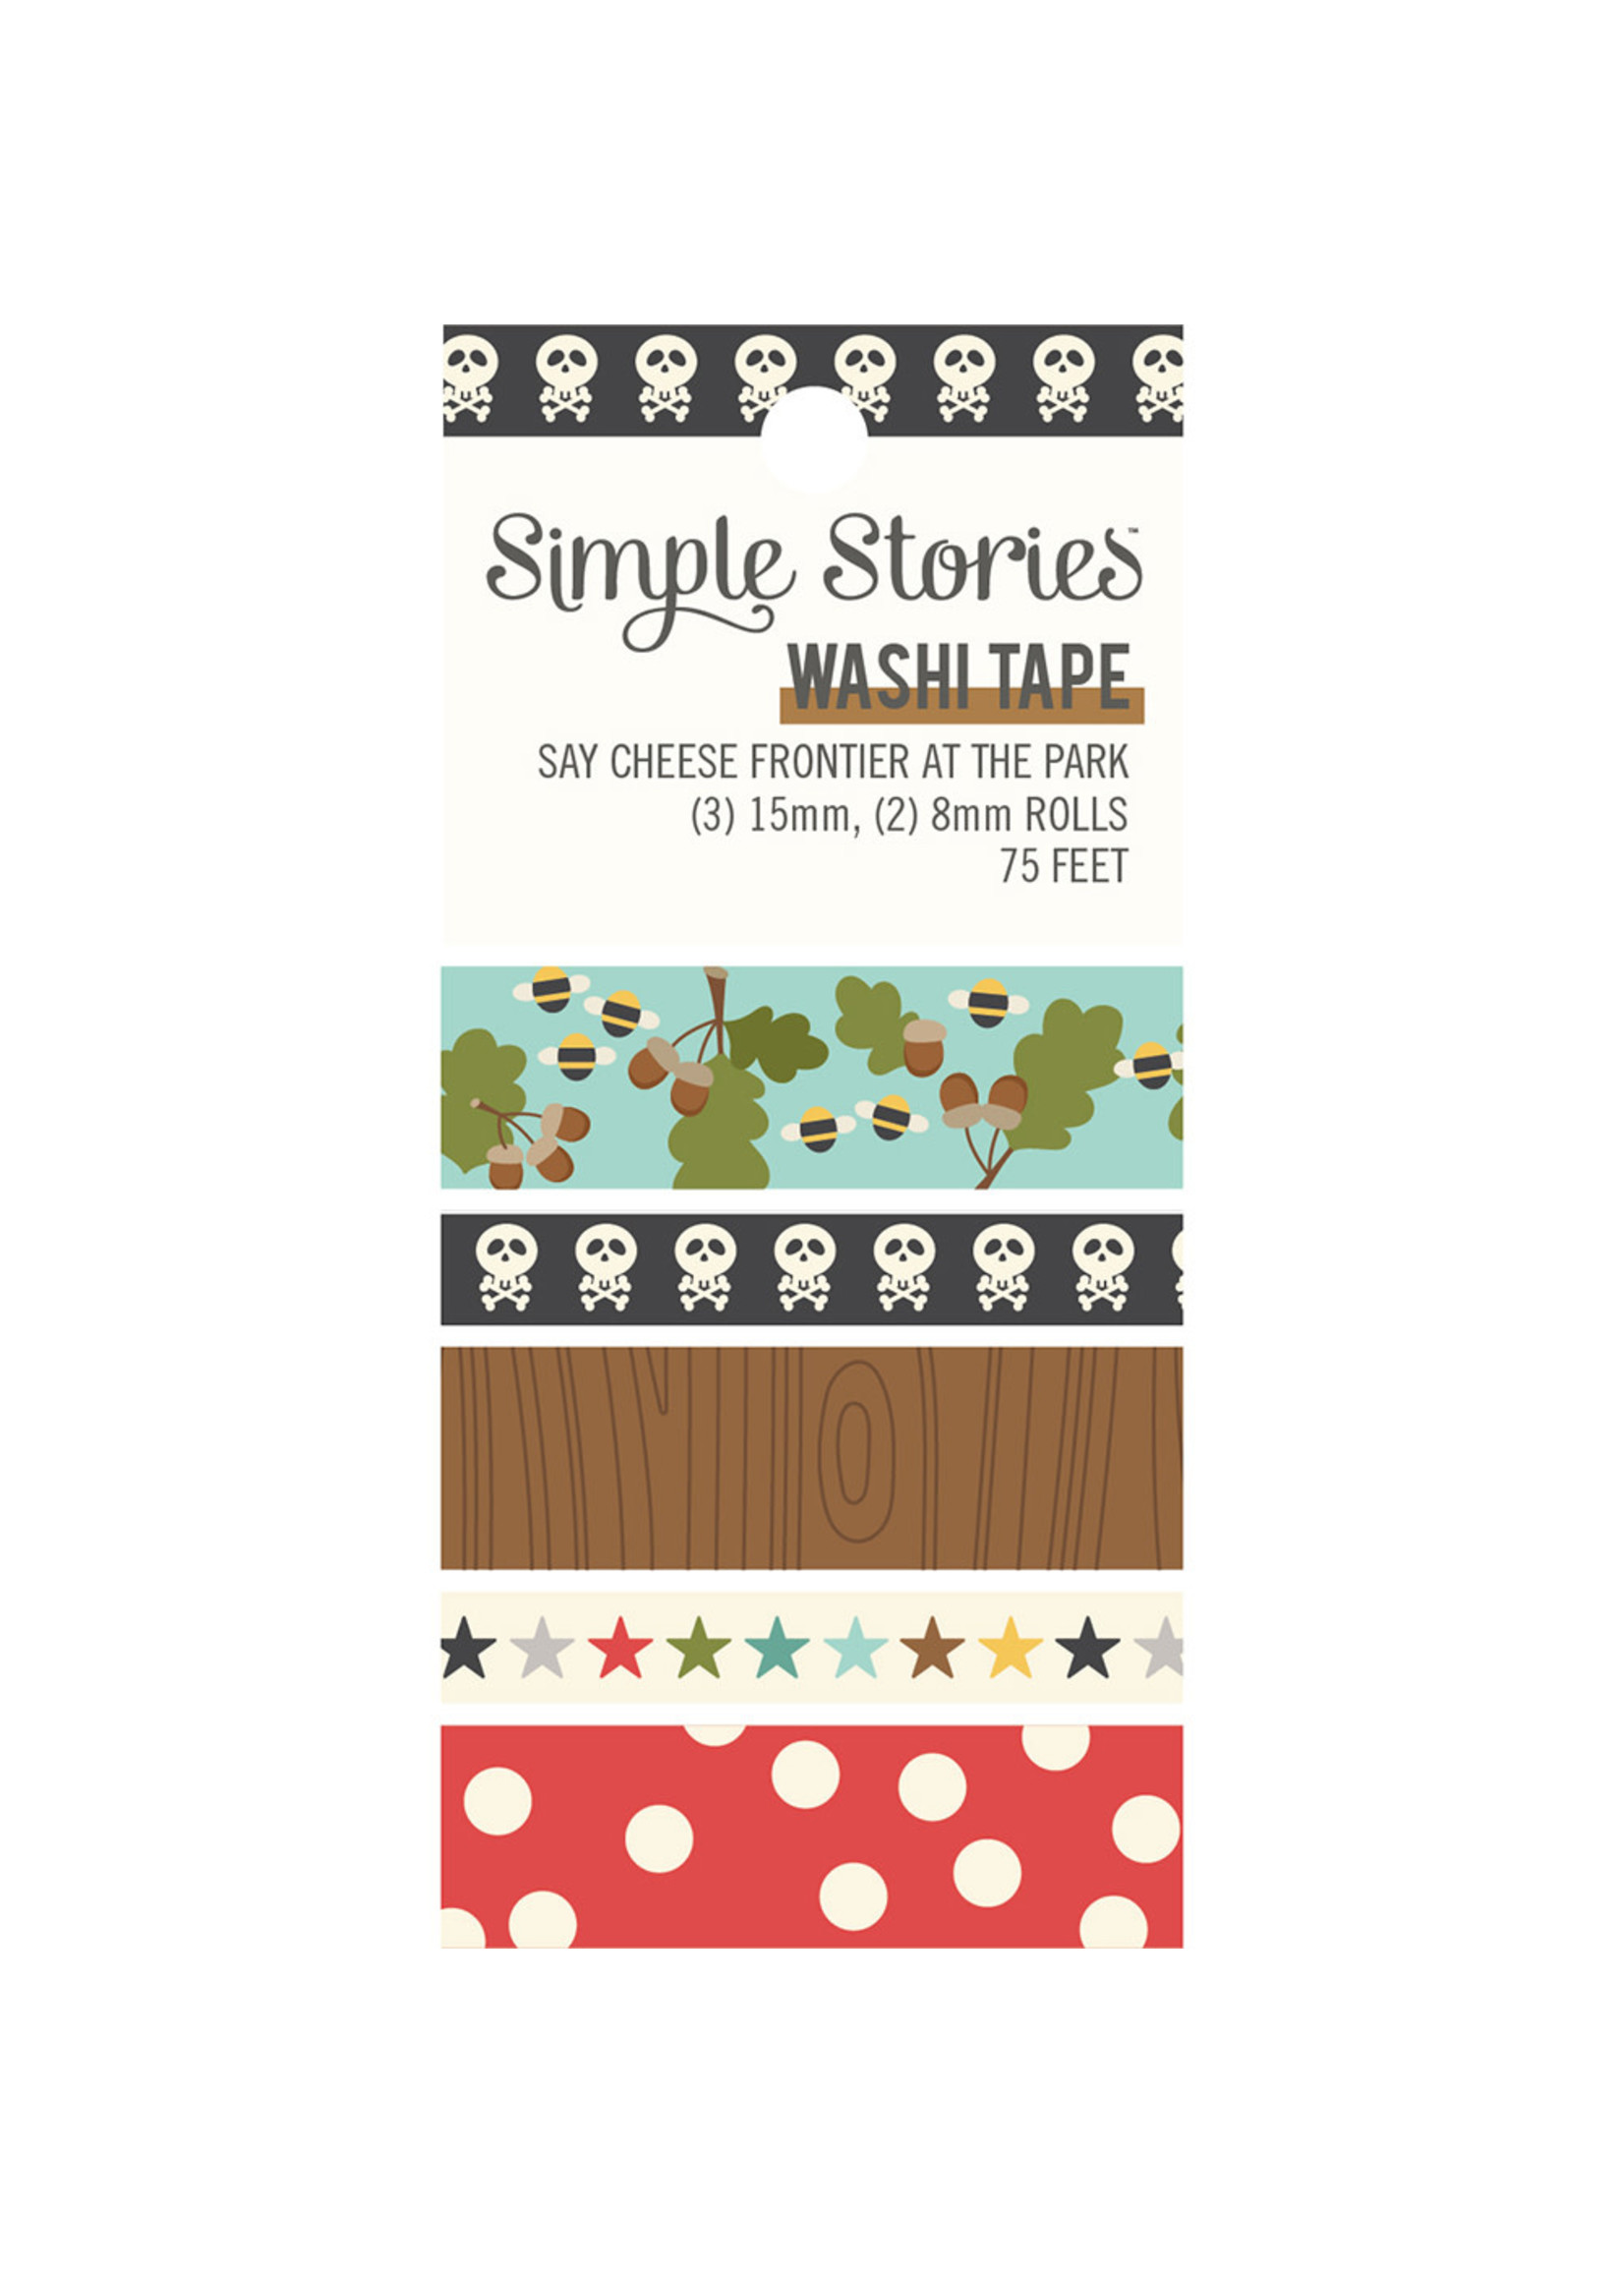 Simple Stories Say Cheese Frontier at the Park - Washi Tape